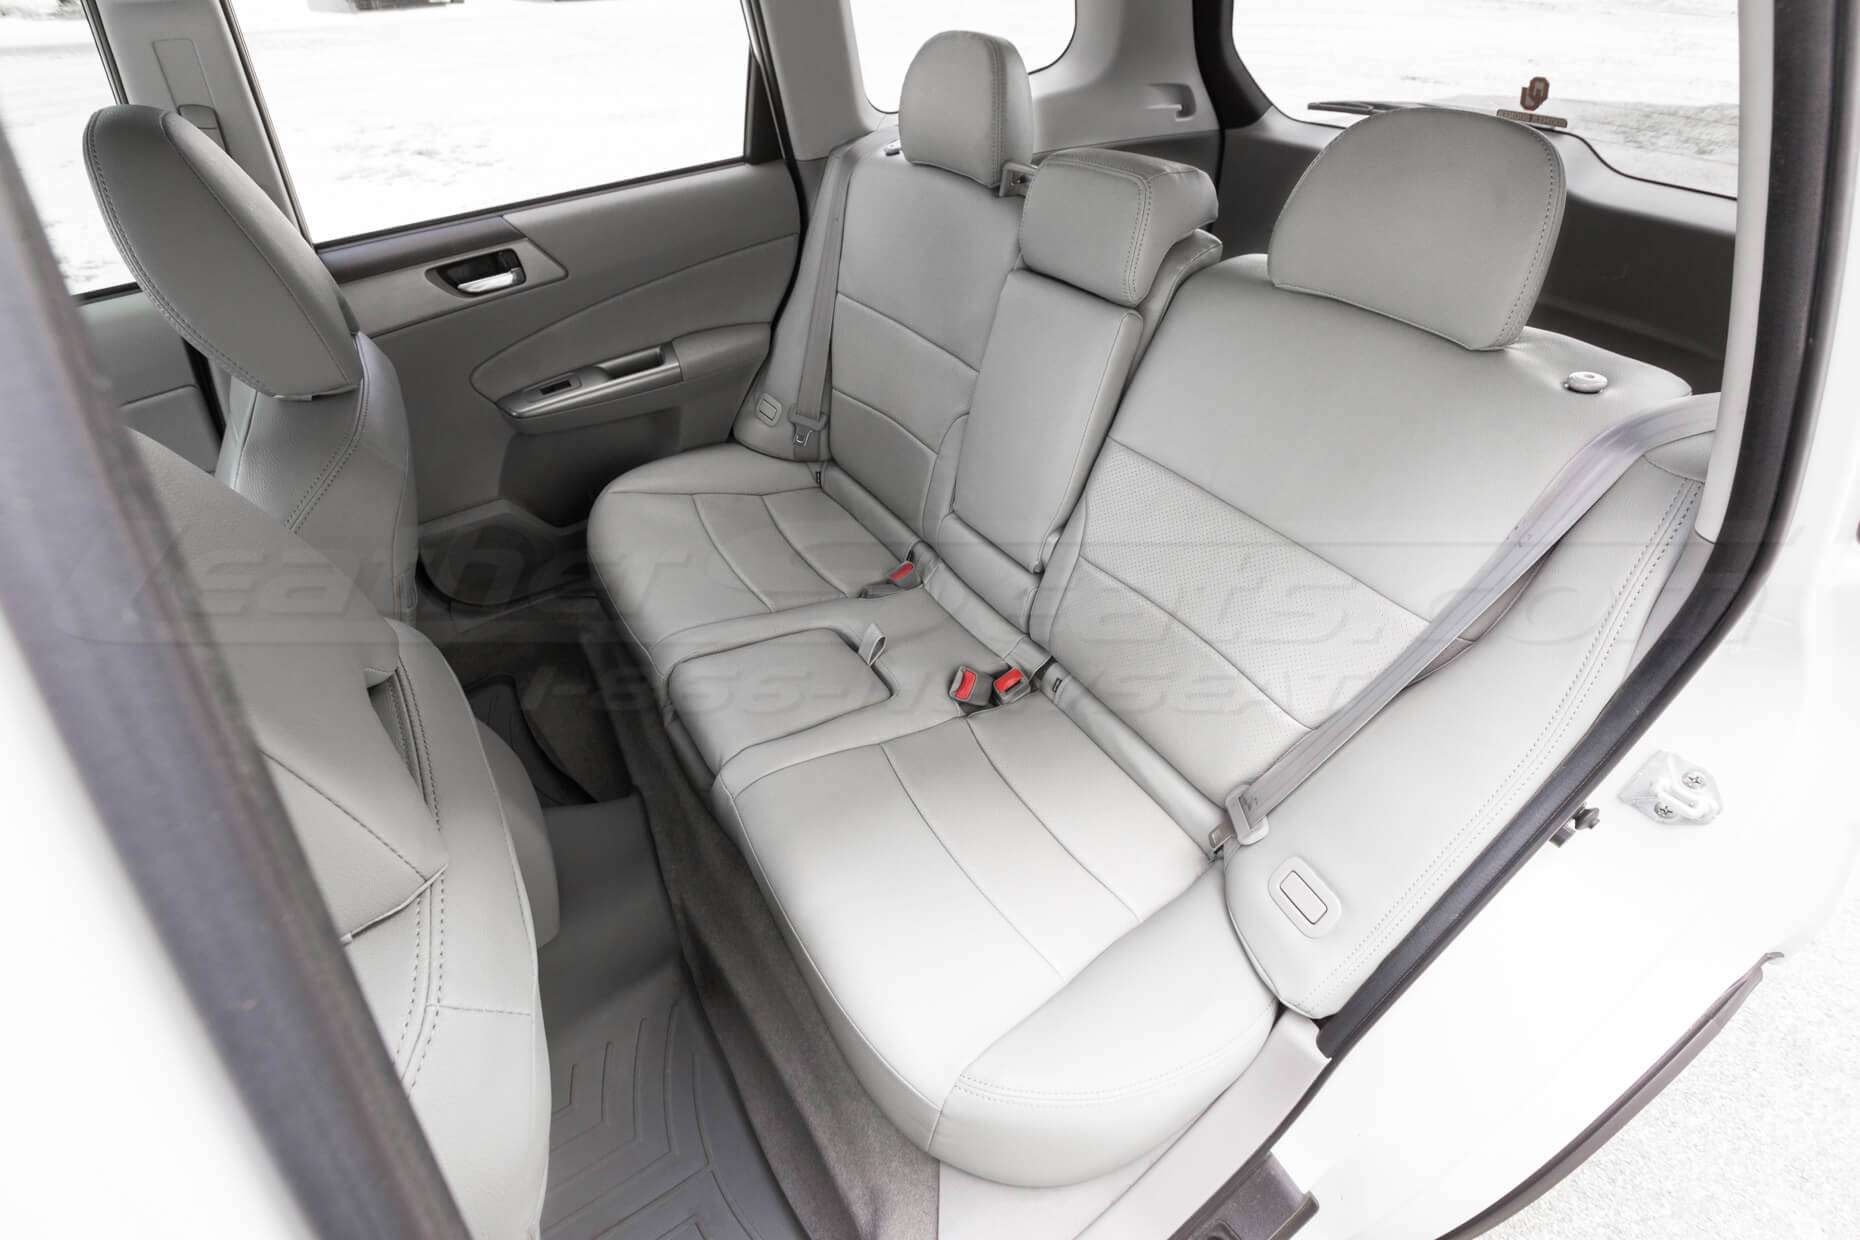 Subaru Forester Upholstery Kit - Ash - Installed - Rear seats from driver side perspective